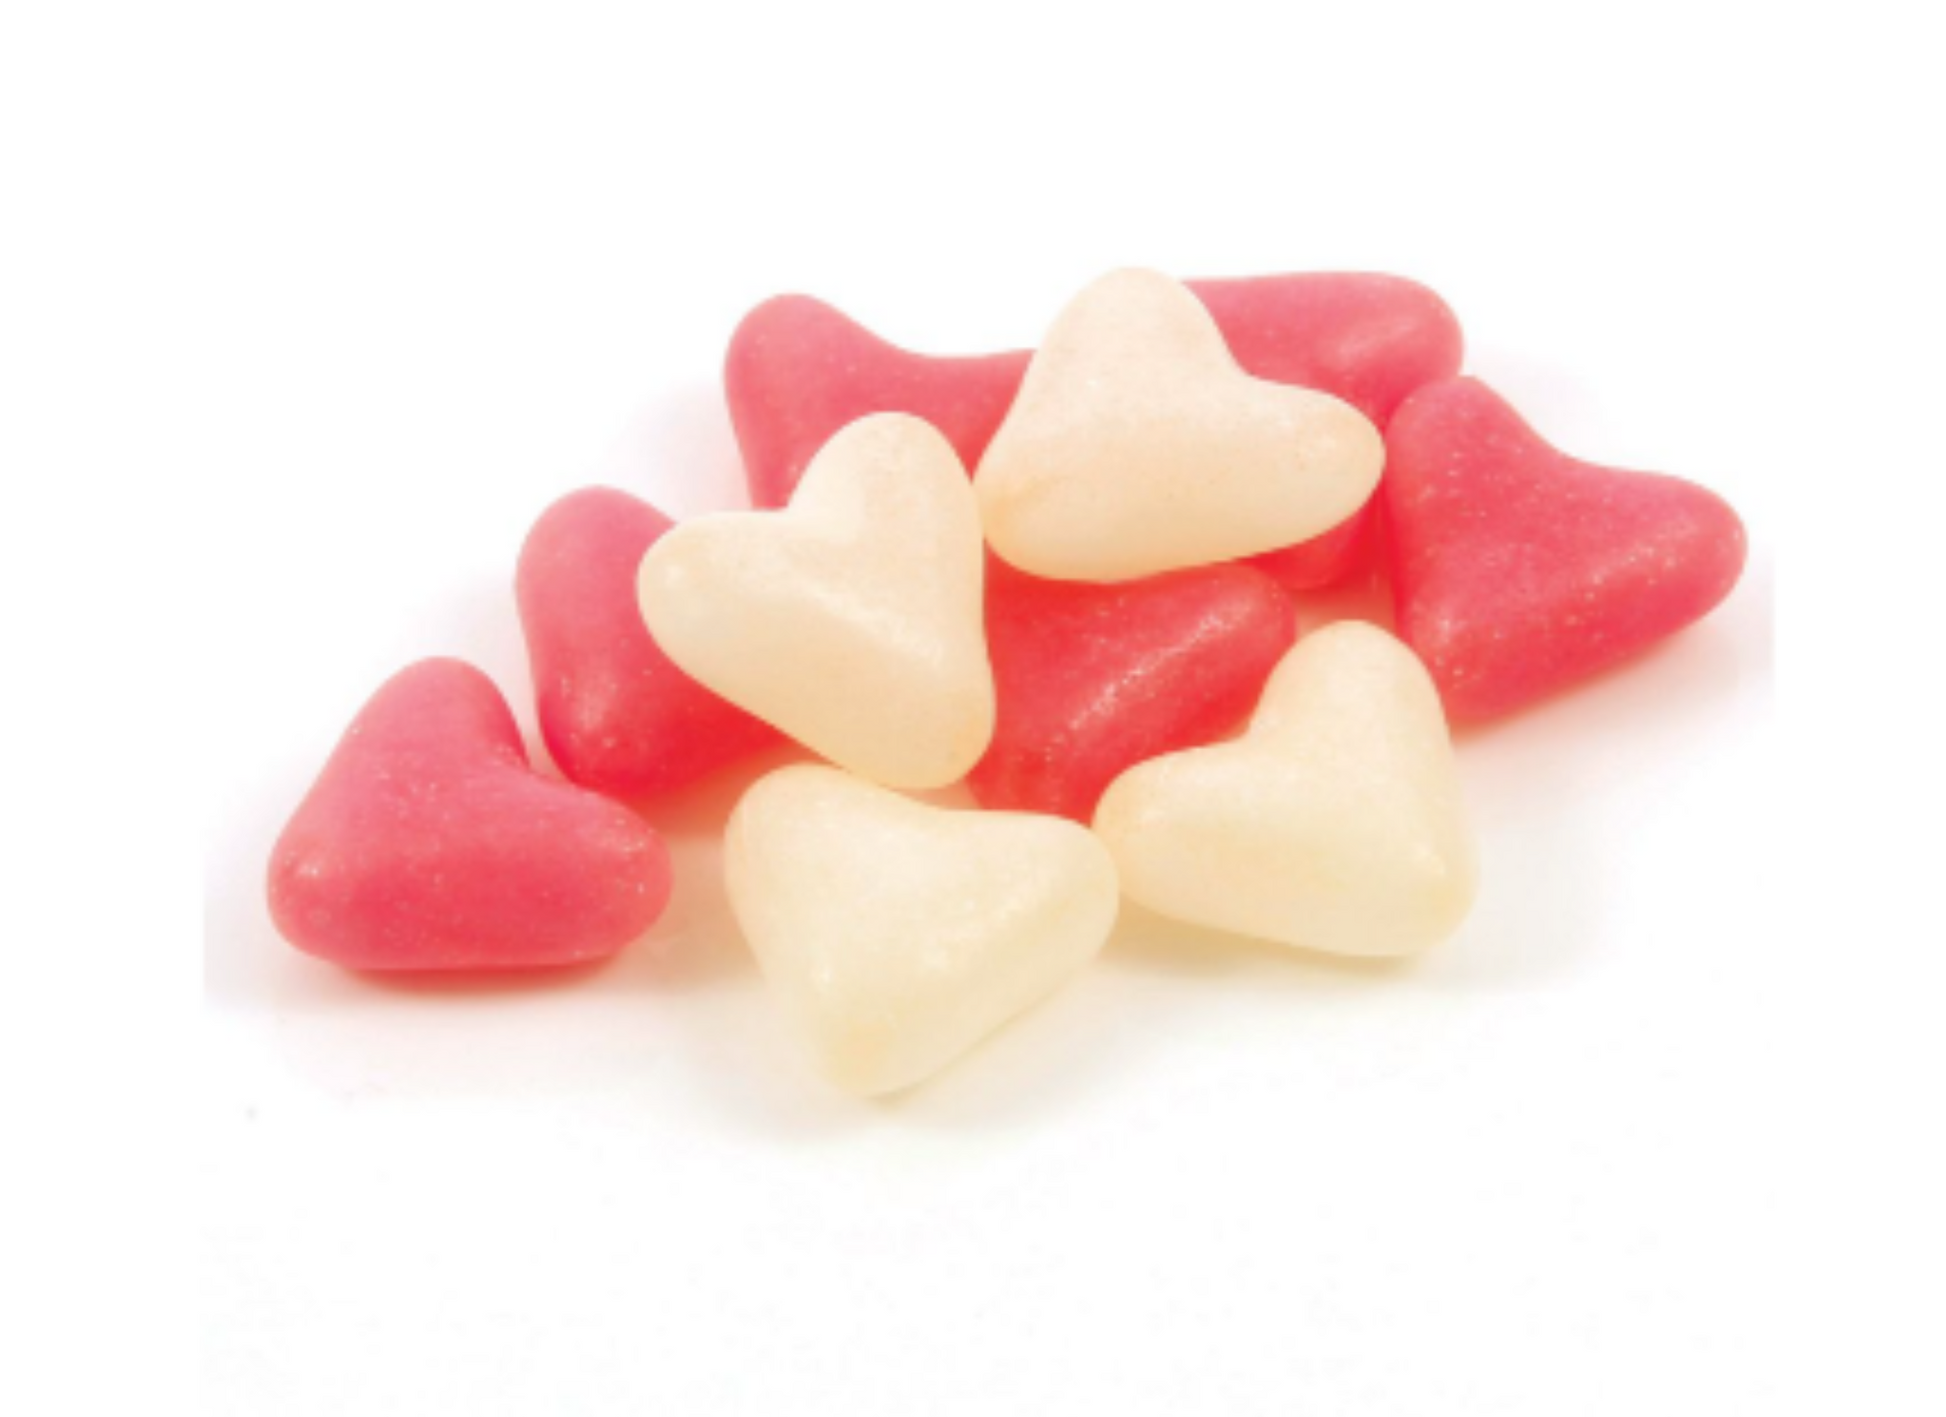 Wedding Event heart shape sweets with persinalised wishes